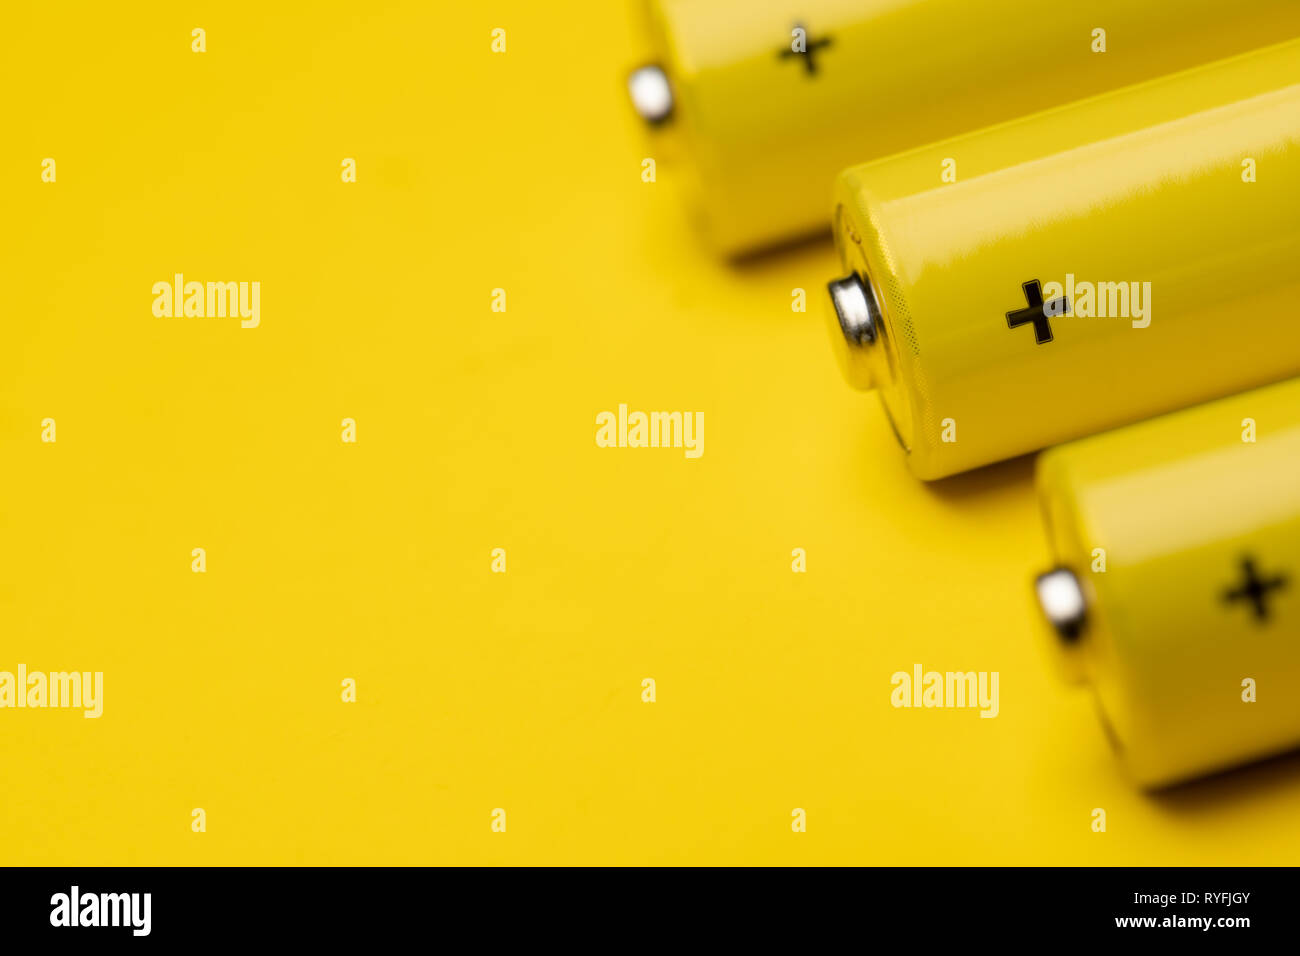 Close up shot of yellow AAA alkaline or rechargeable NiMH batteries or on yellow background, shallow focus Stock Photo